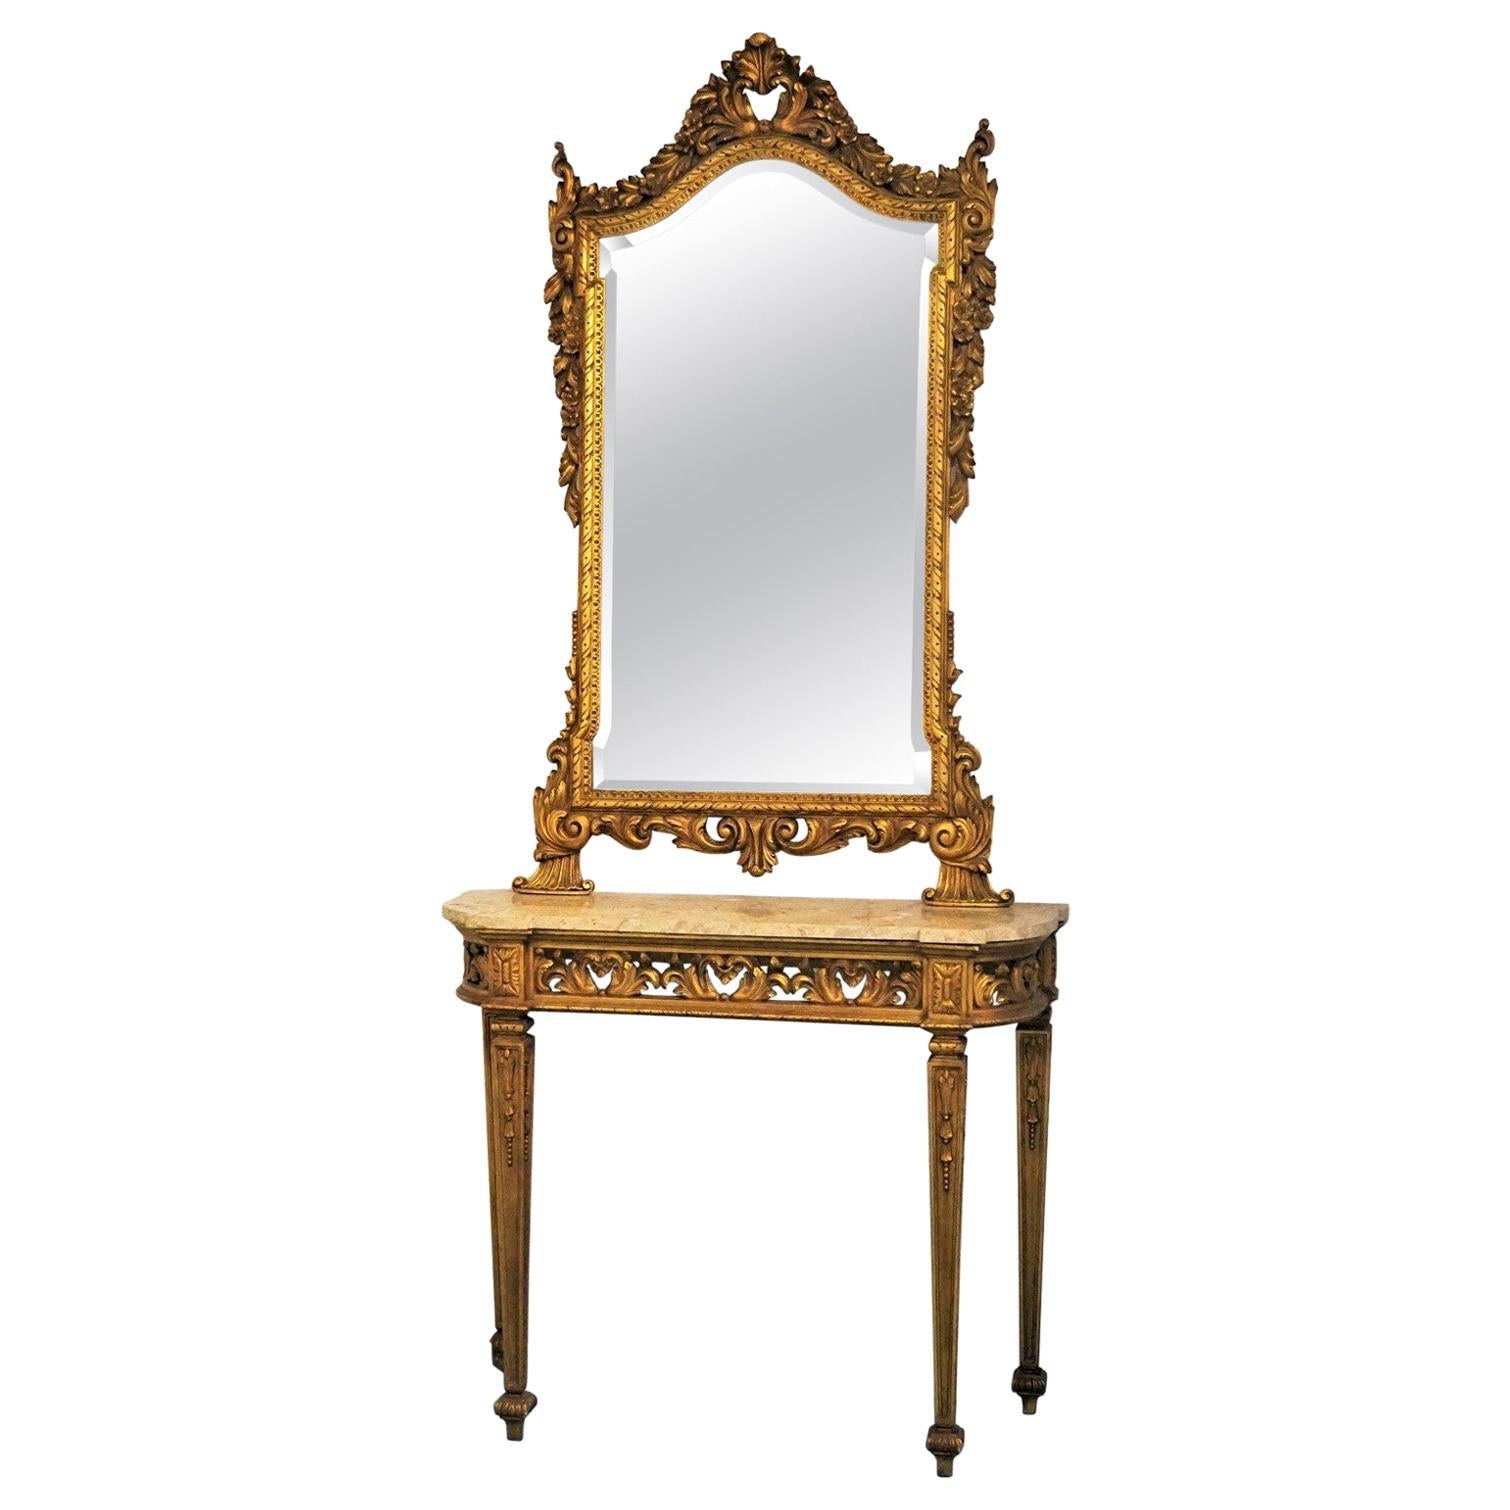 Italian Louis XVI Style Giltwood Console Table and Mirror, 19th Century